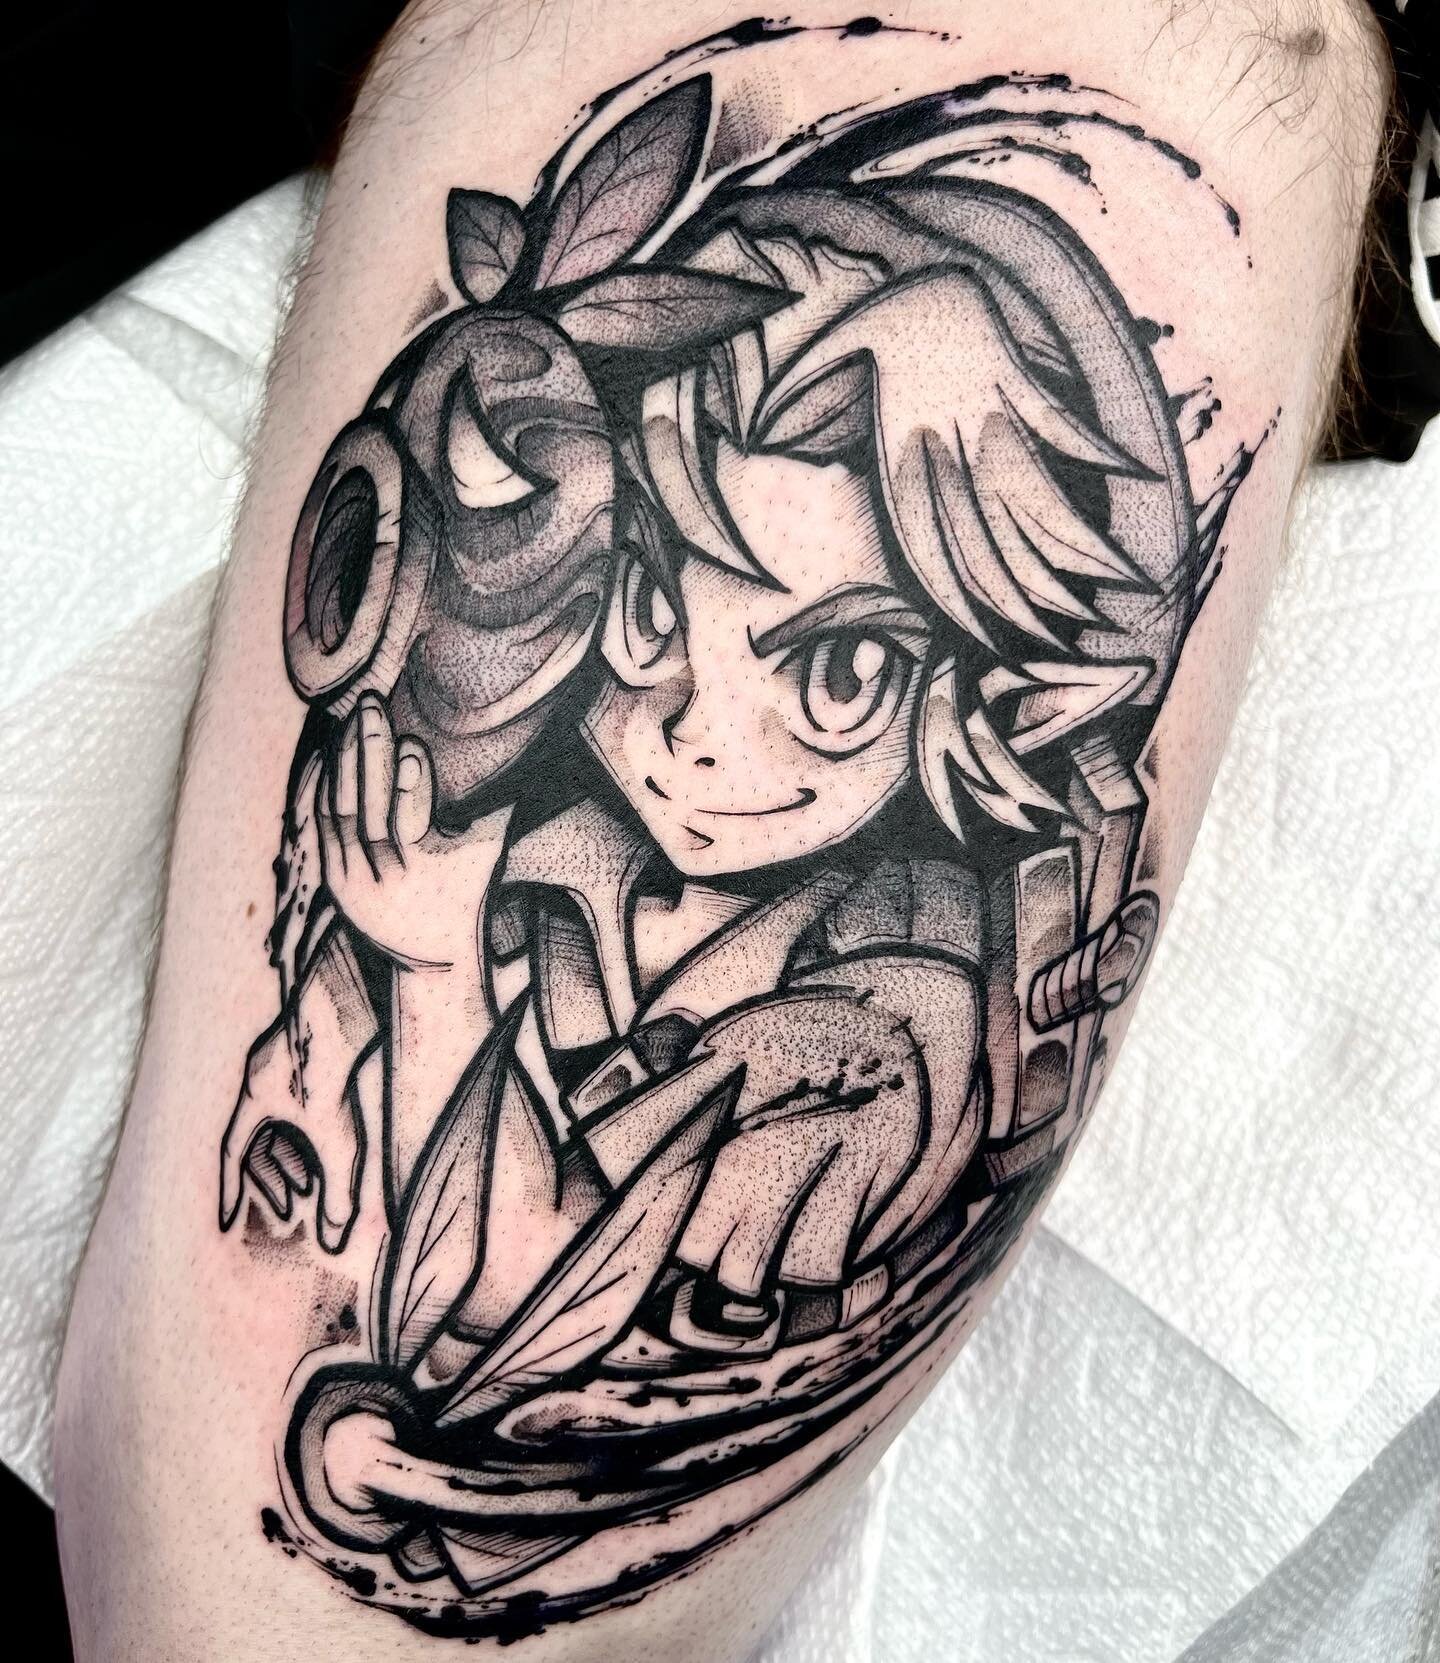 From my Makora&rsquo;s Mask flash I posted forever ago! I have been wanting to do this for so long so thank you @joshysinger for hanging out, it was really nice meeting you! Come back soon 
.
.
I have really been wanting to do more video game tattoos